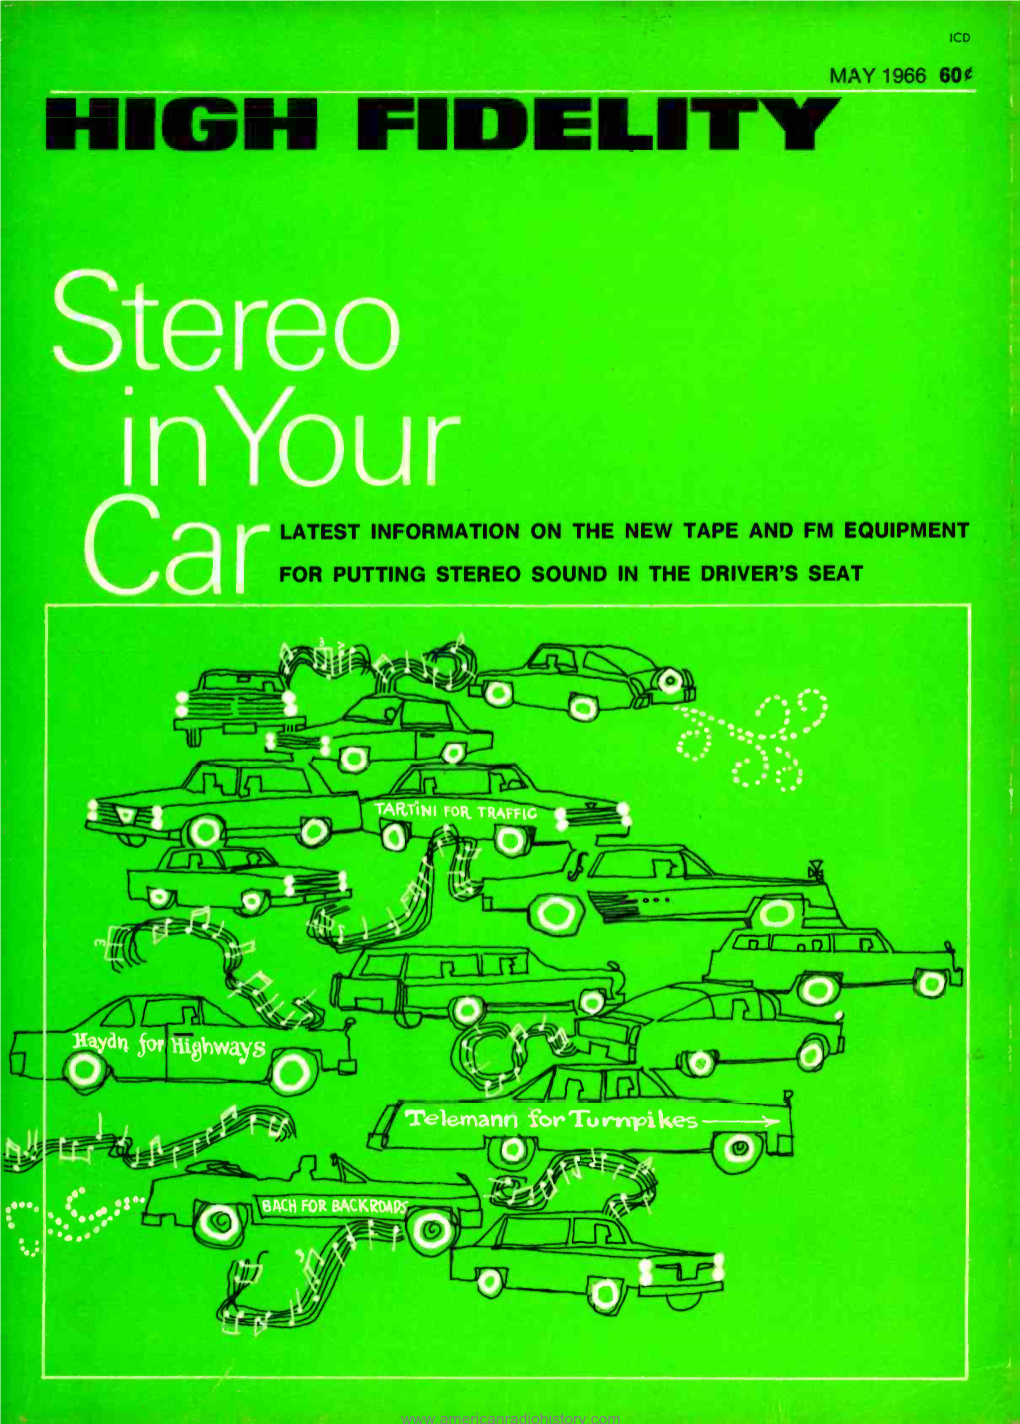 FIDELITYMAY 1966 600 Stereo Inyou LATEST INFORMATION on the NEW TAPE and FM EQUIPMENT Ca for PUTTING STEREO SOUND in the DRIVER's SEAT